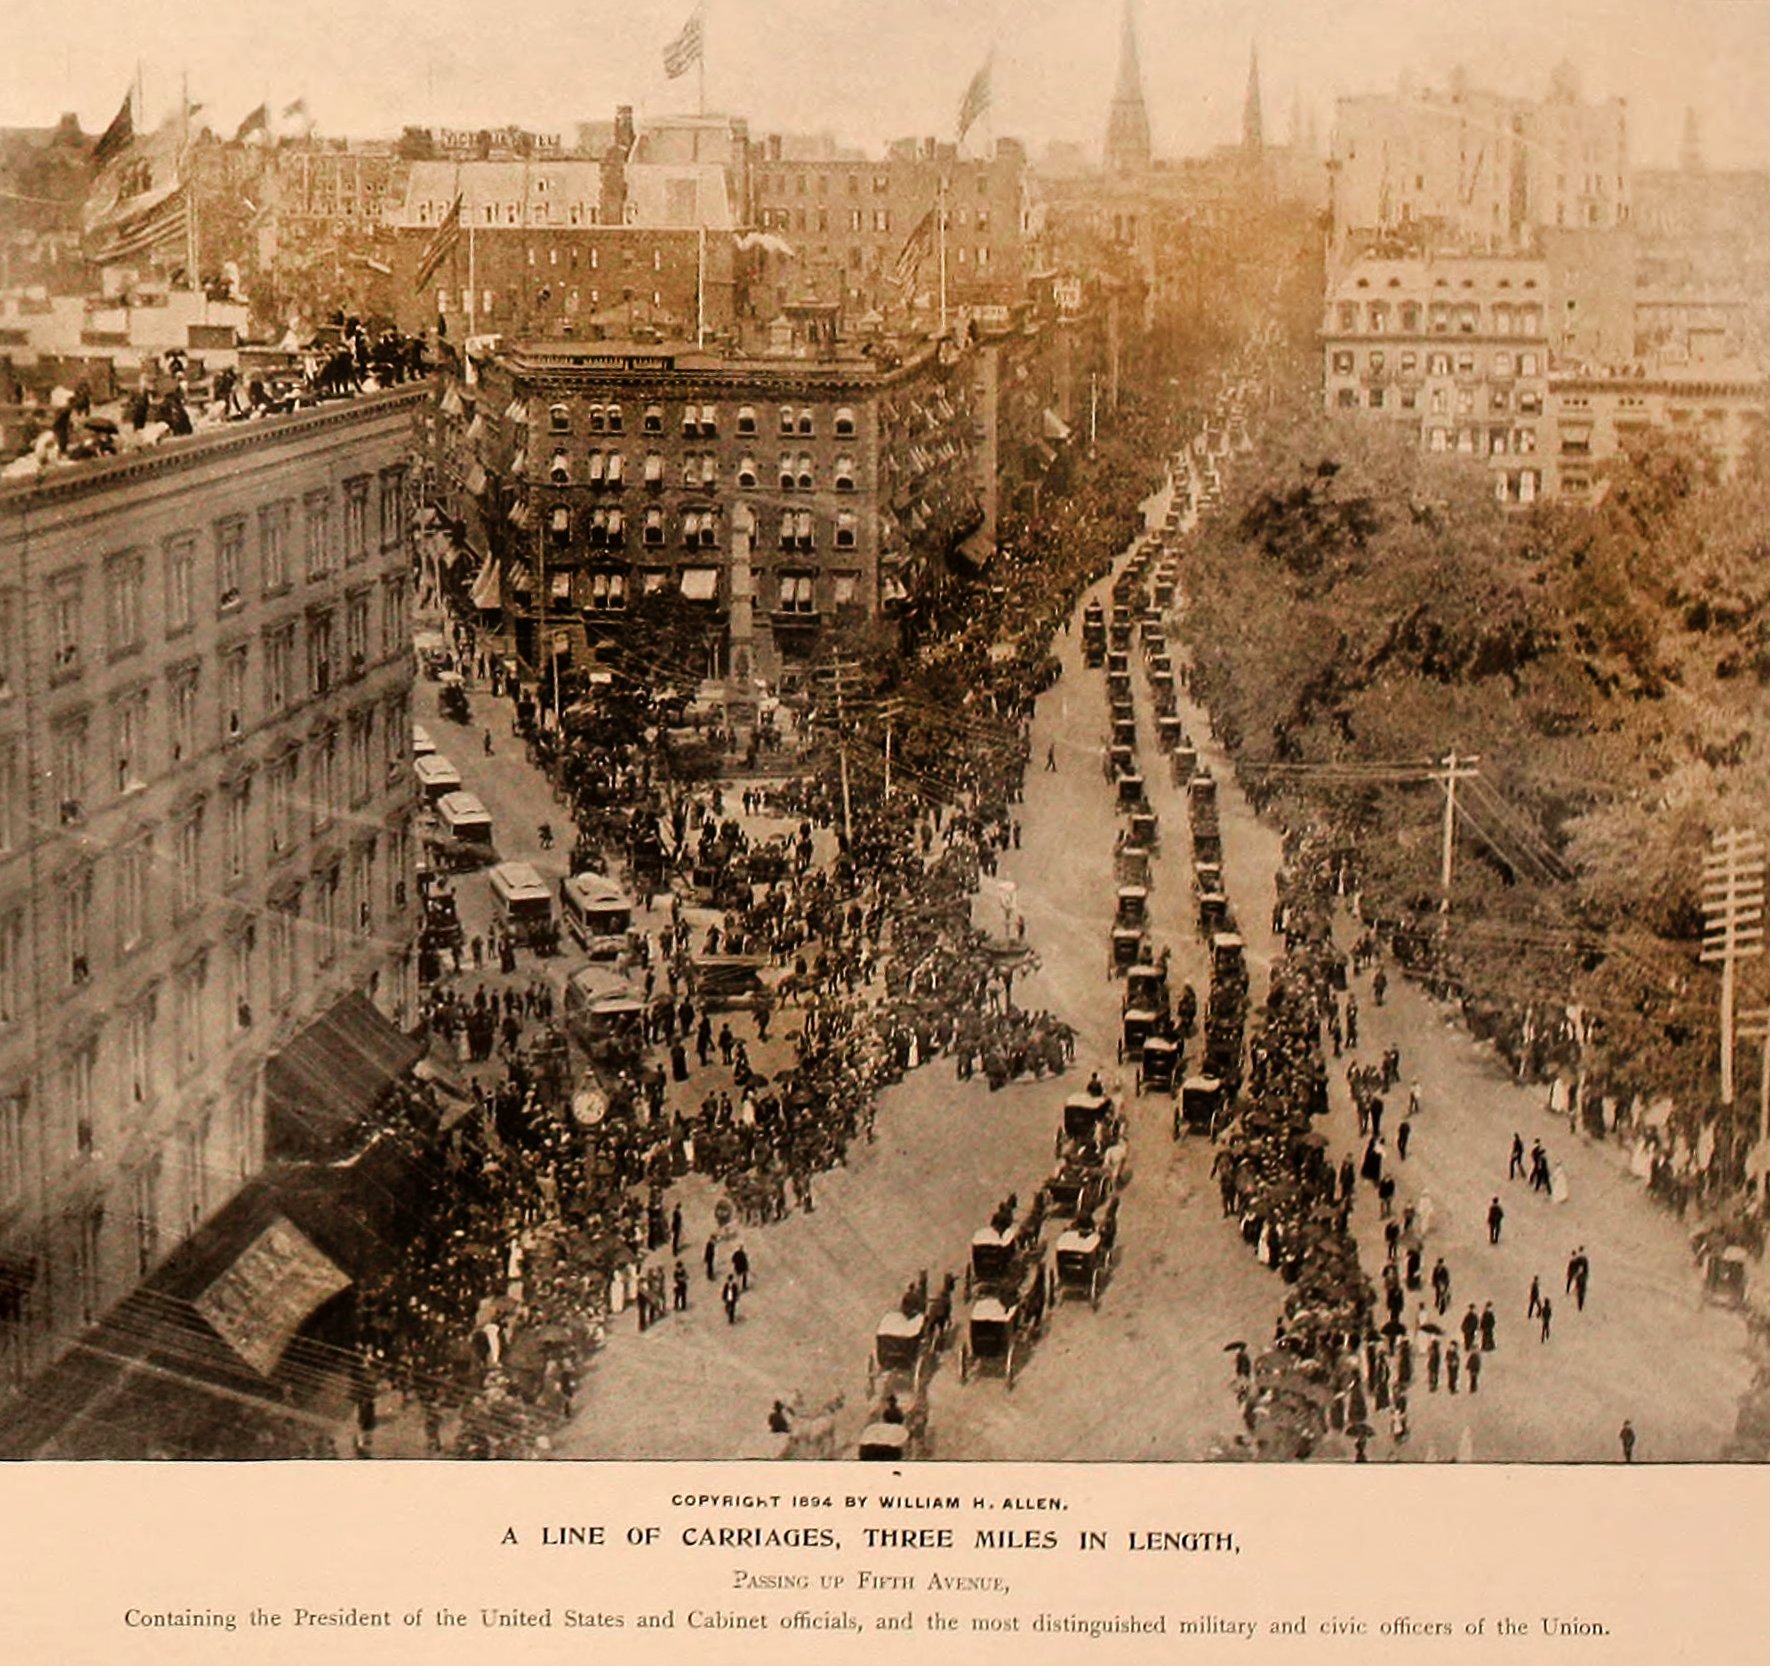 A historical photograph of Ulysses S. Grant’s funeral procession, showing a line of horse-drawn carriages stretching three miles along 5th Avenue in New York, with crowds of onlookers lining the streets and buildings adorned with American flags, as dignitaries and military personnel pay their respects.